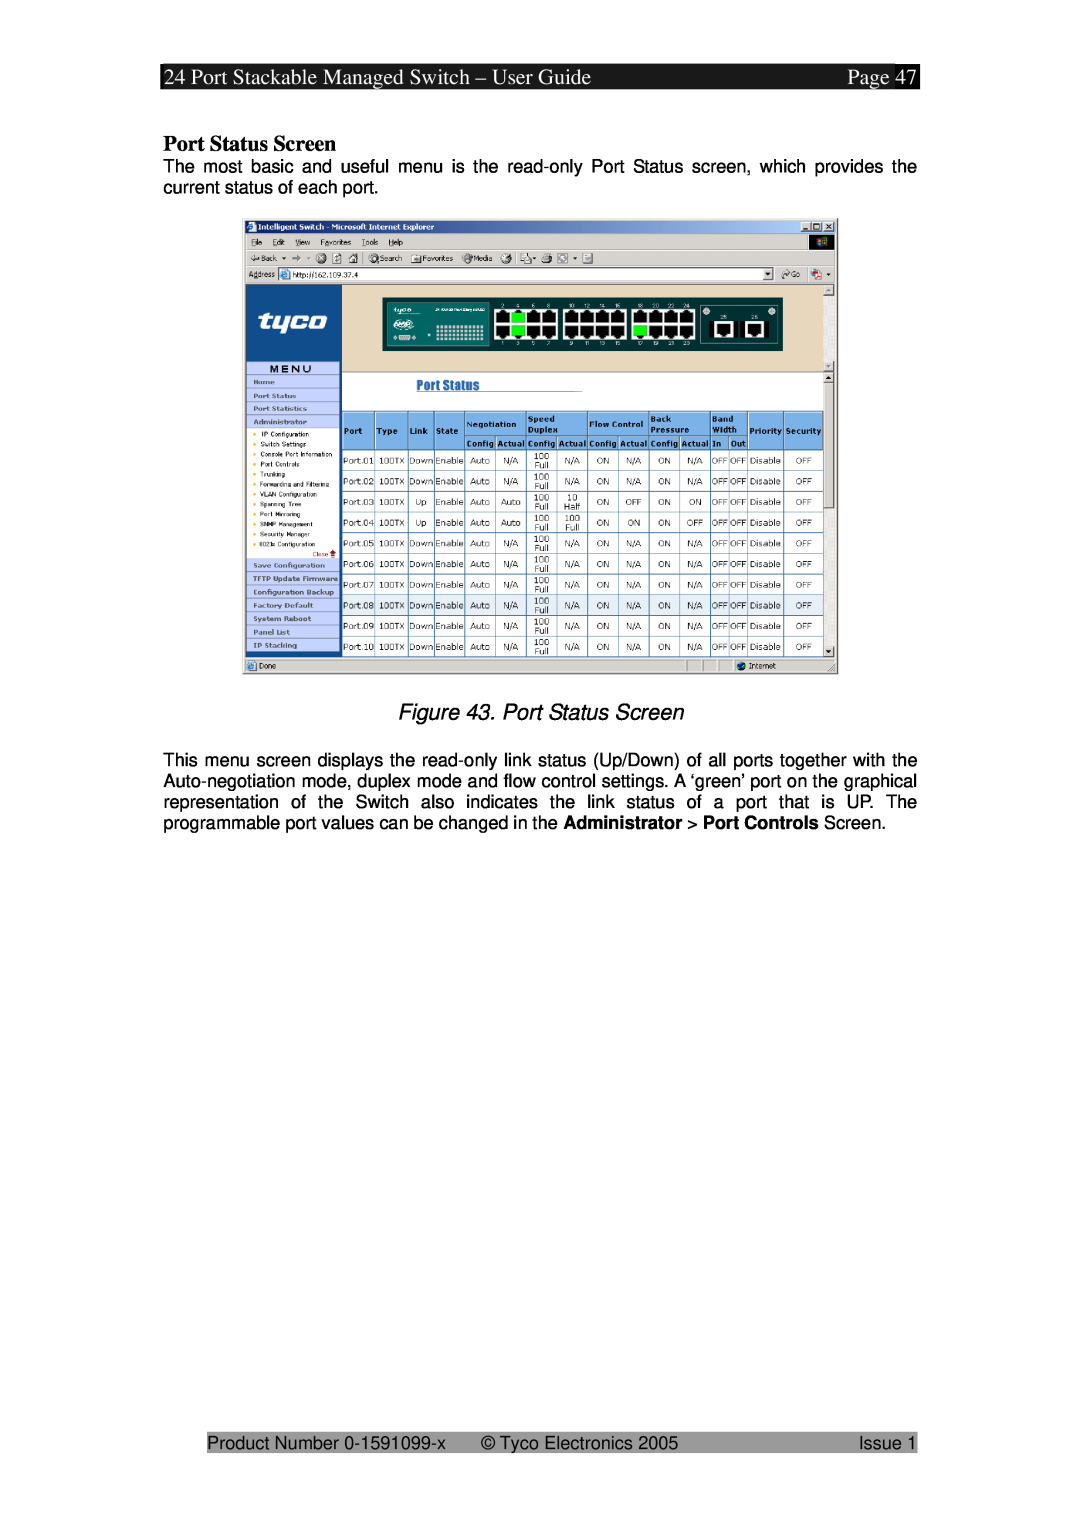 Tyco 0-1591099-x manual Port Stackable Managed Switch - User Guide, Page, Port Status Screen 